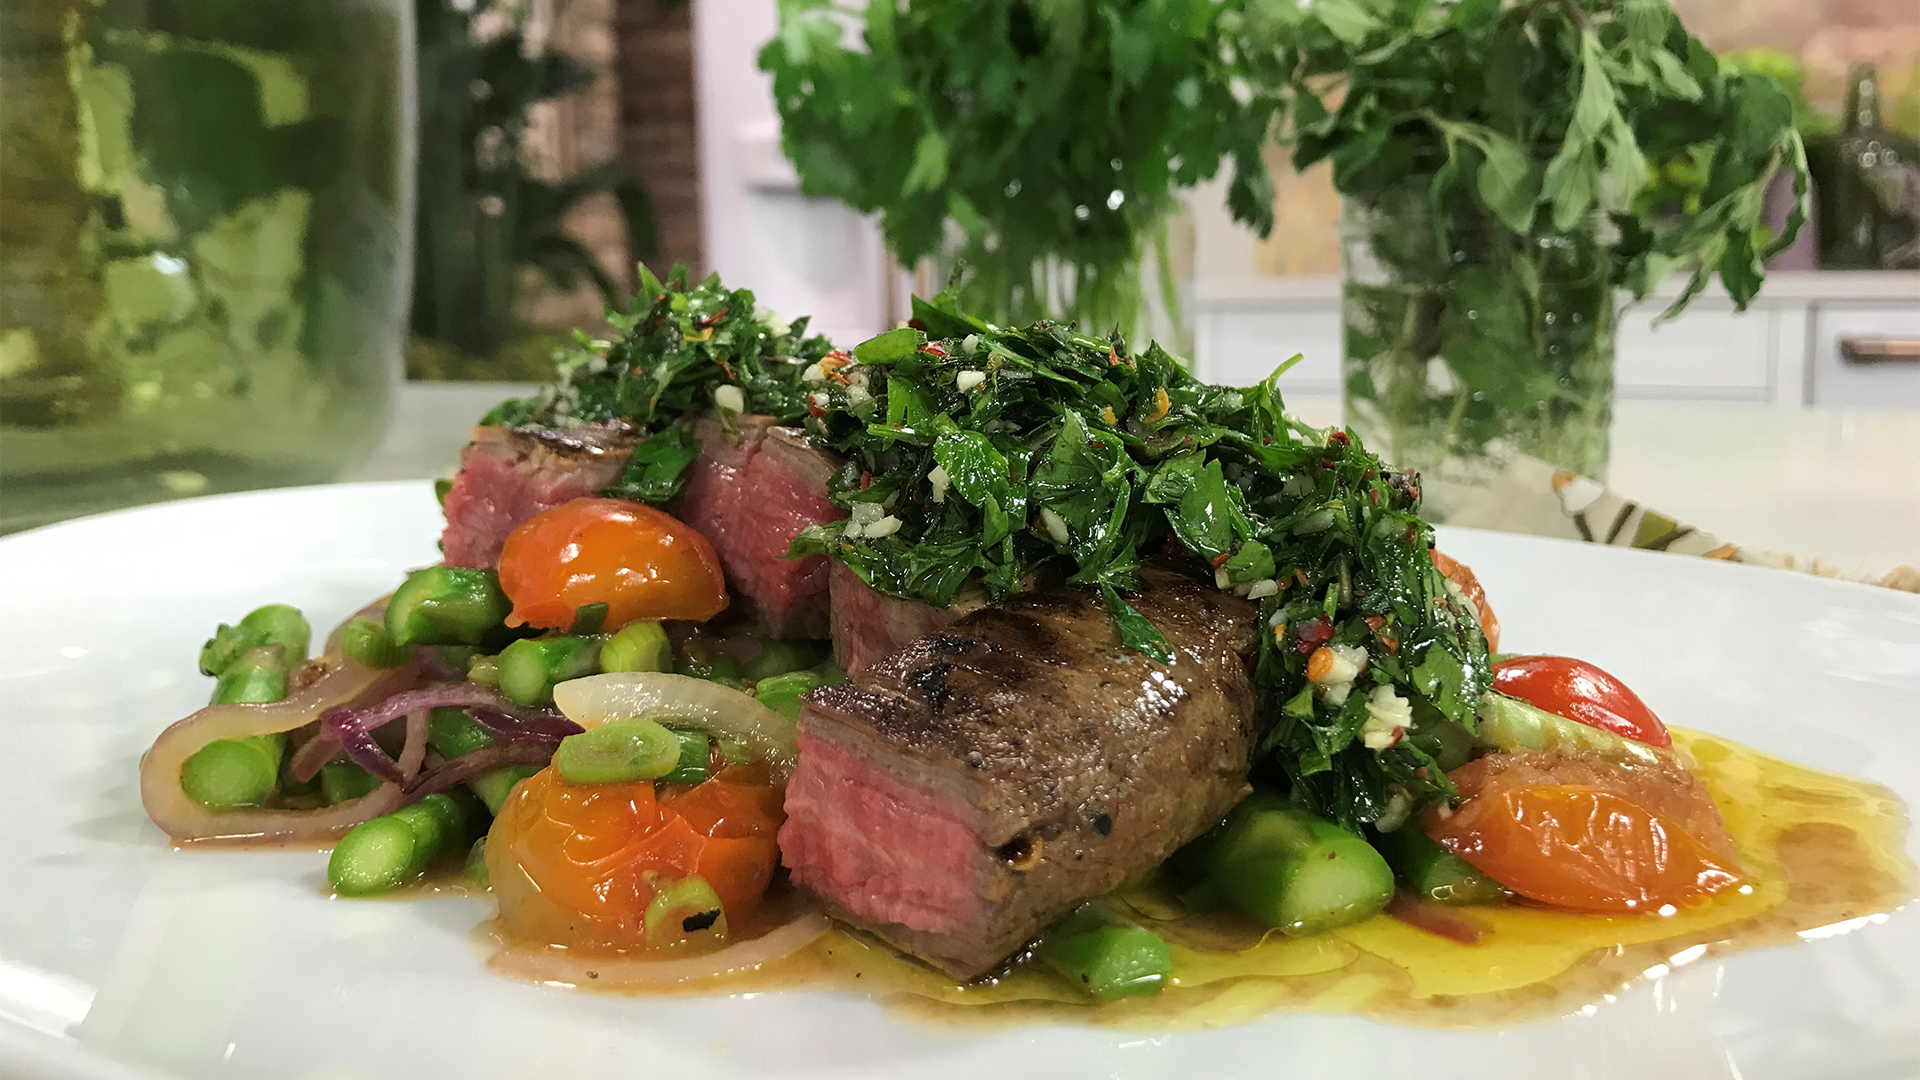 Grilled steak and vegetables with herby chimichurri sauce